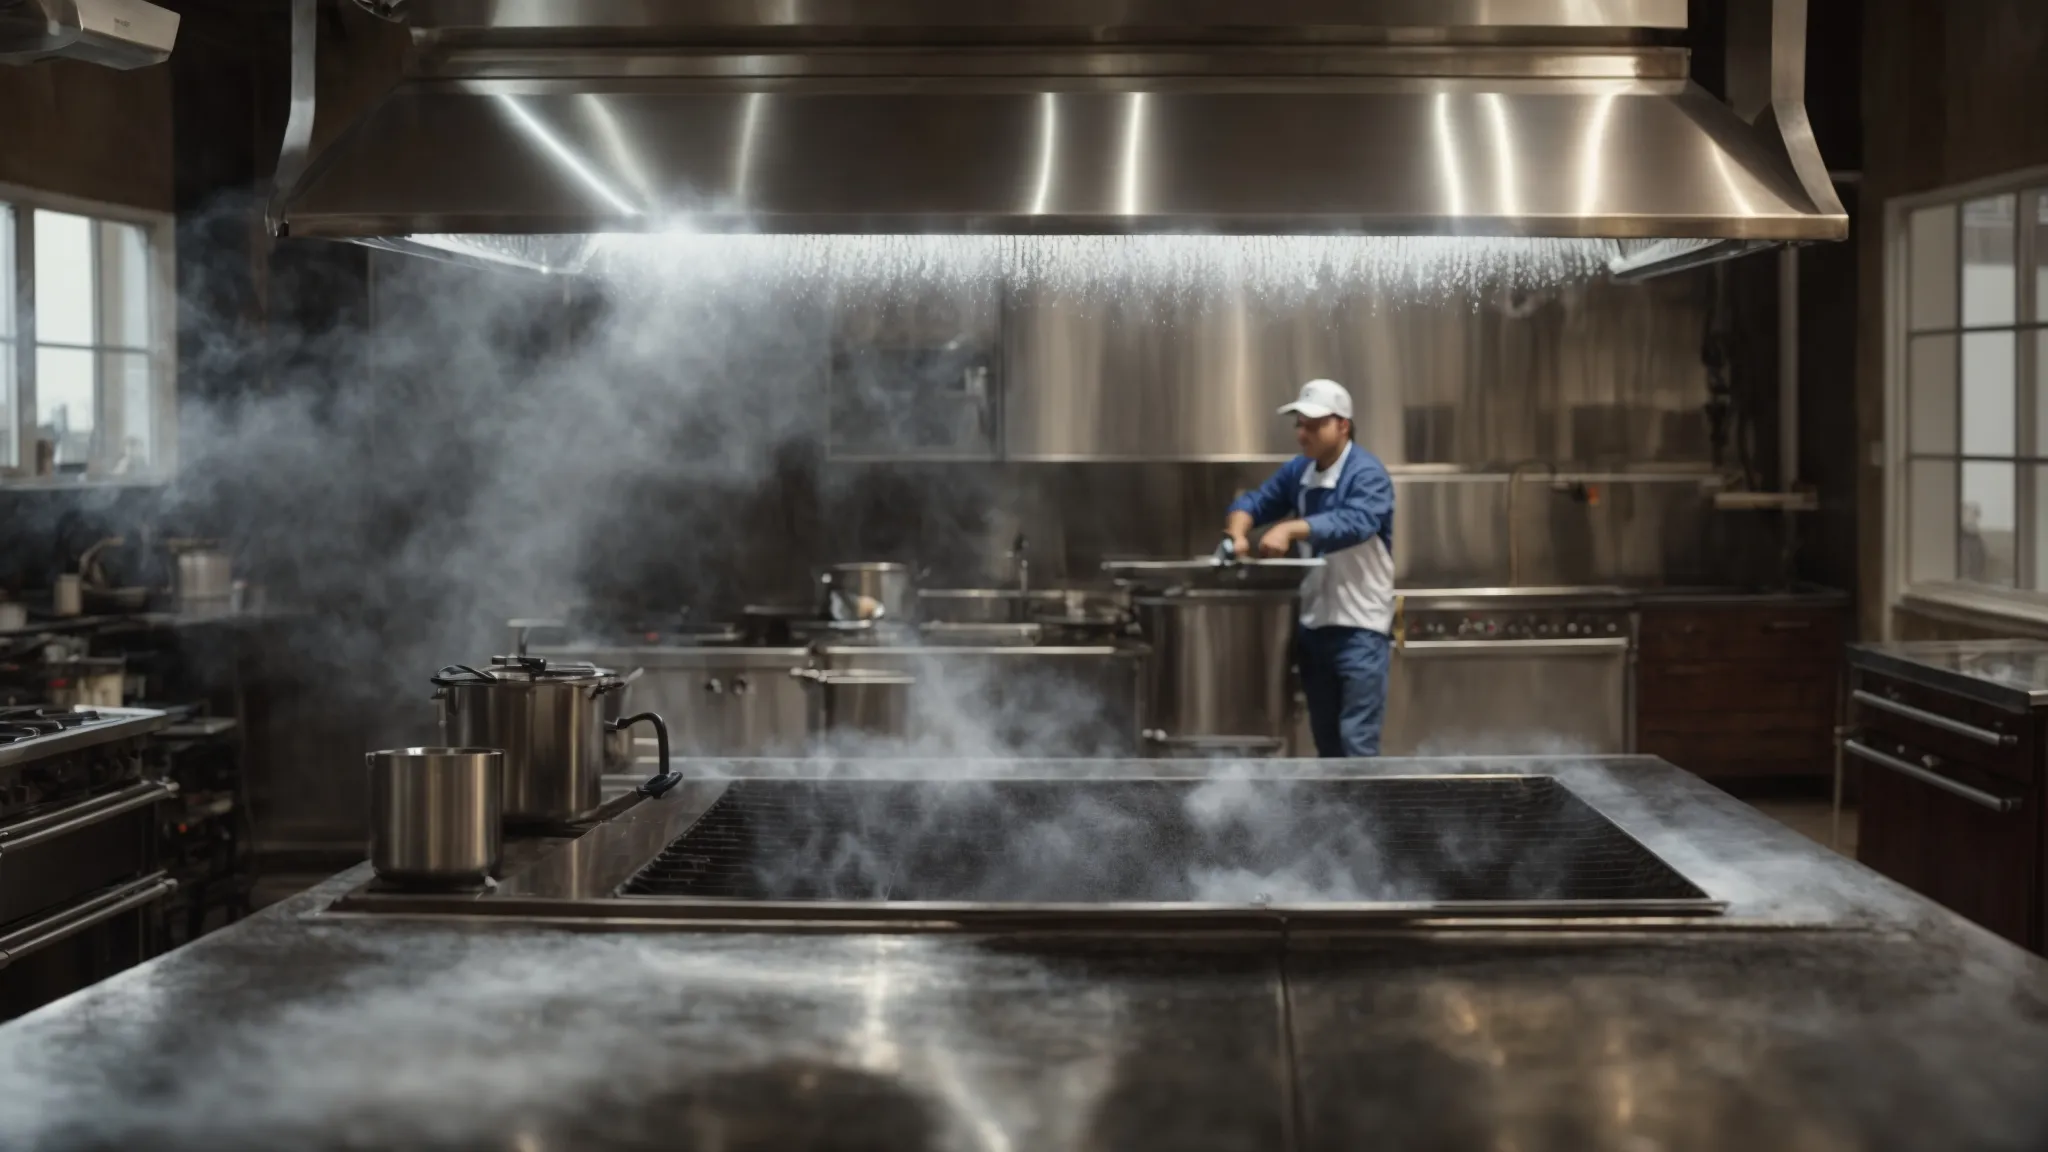 a professional team power washes and degreases a large kitchen hood, restoring its shine.